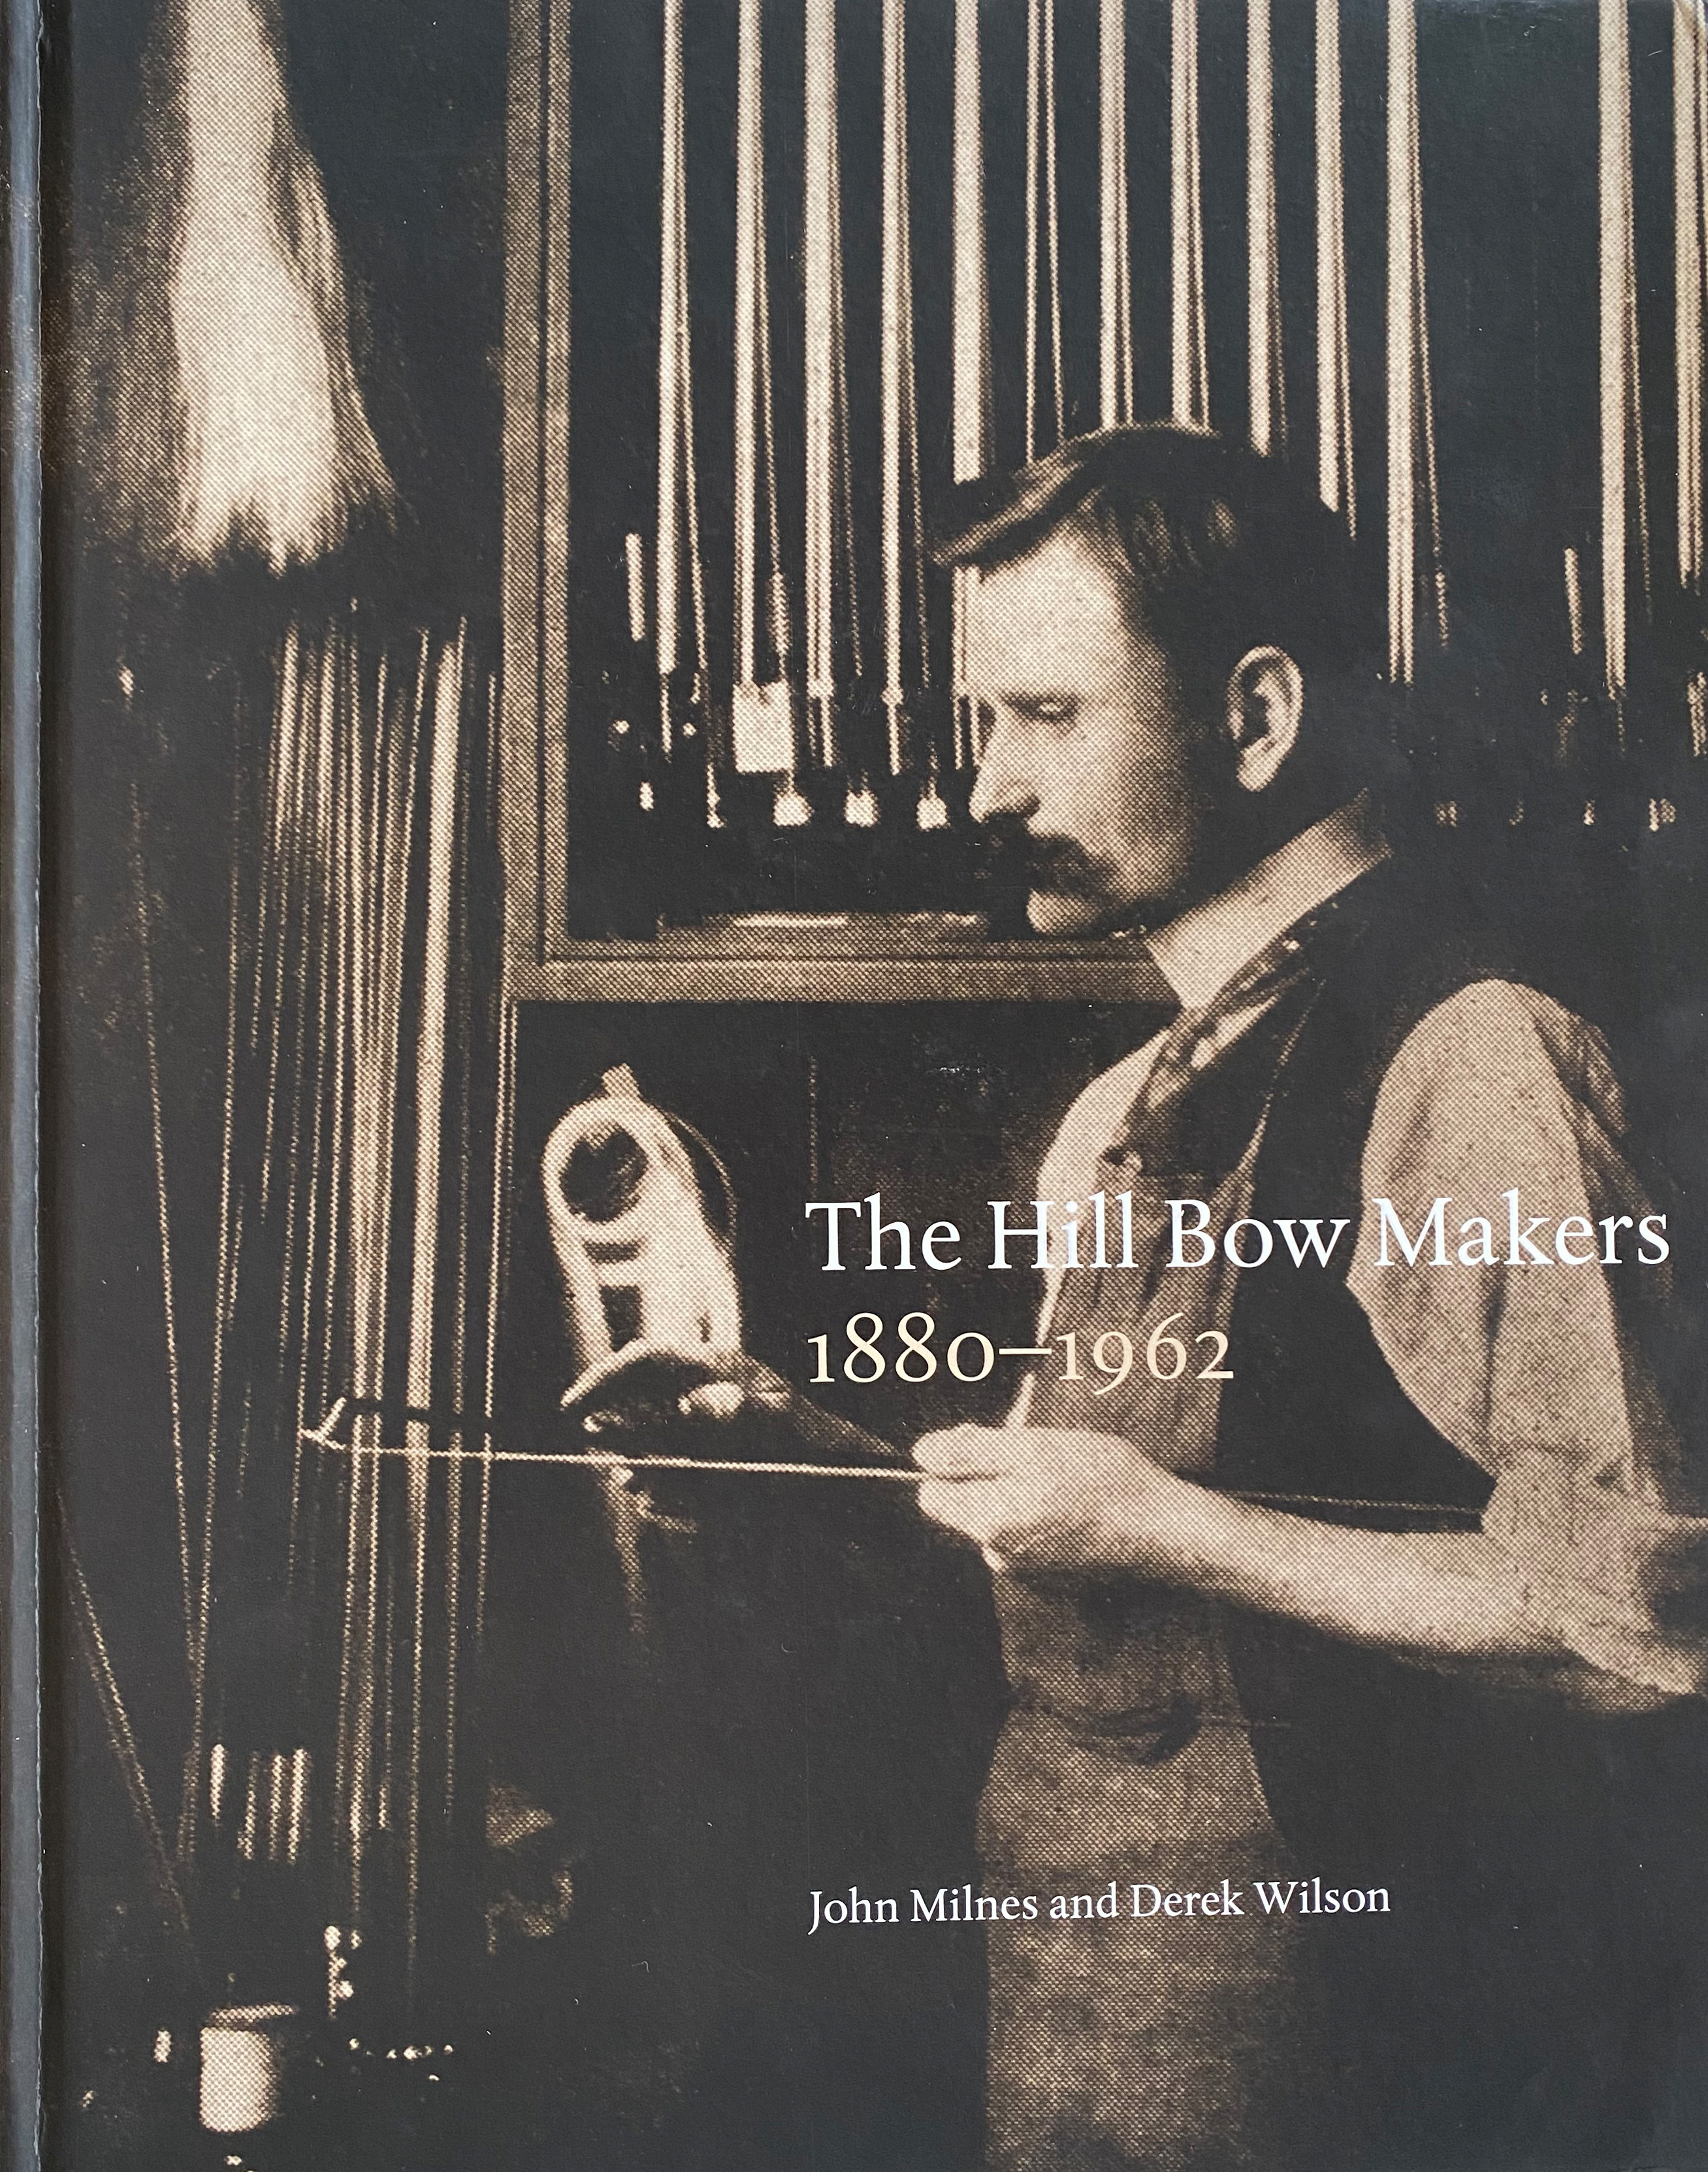 The Hill Bow Makers 1880-1962